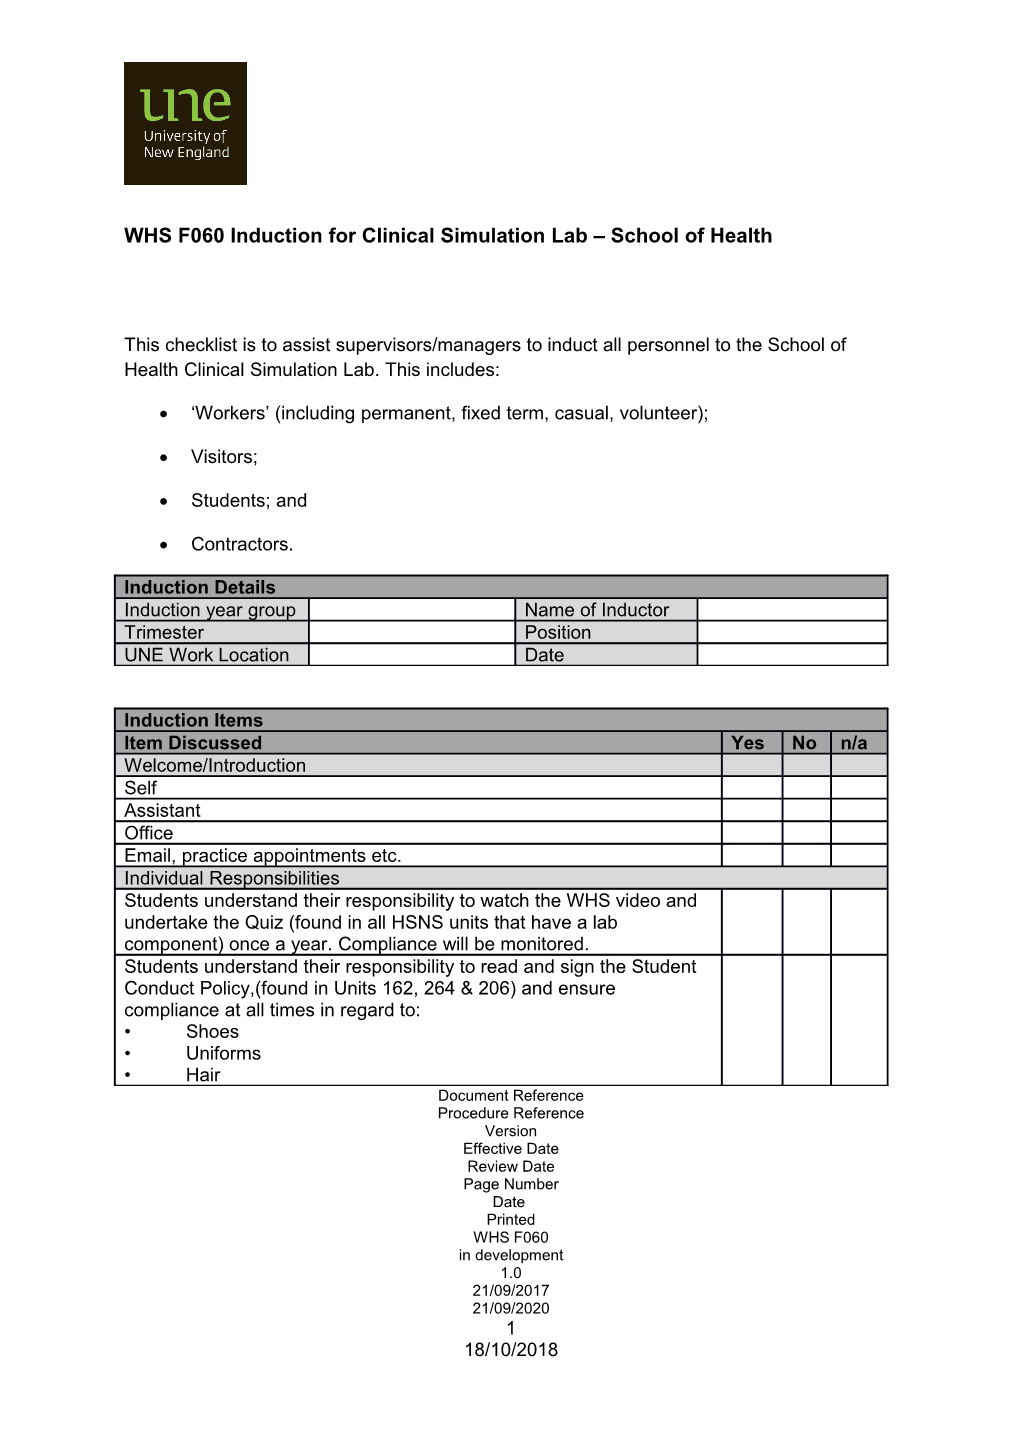 This Checklist Is to Assist Supervisors/Managers to Induct All Personnel to the School